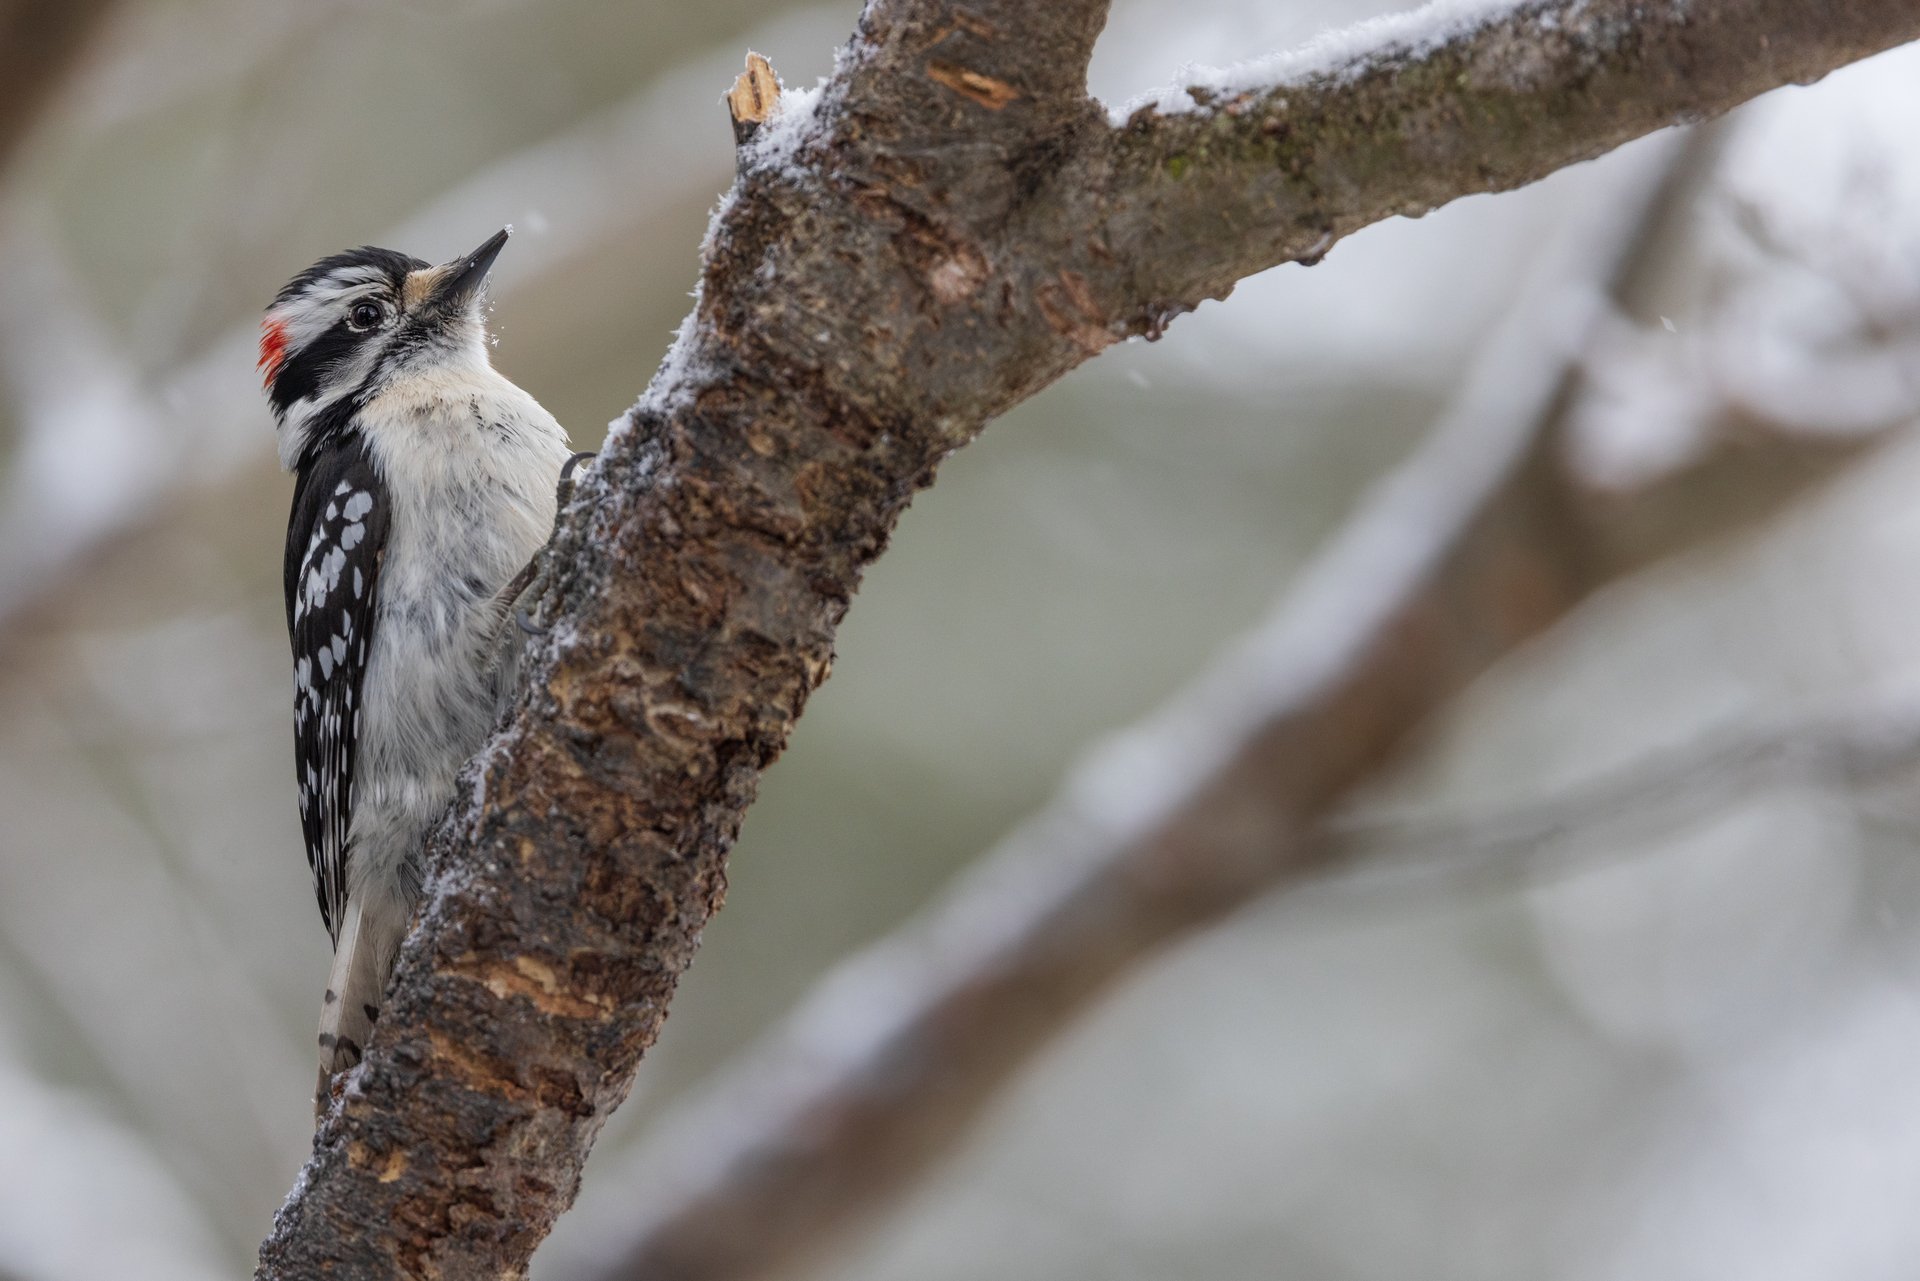 Downy Woodpecker perched on branch